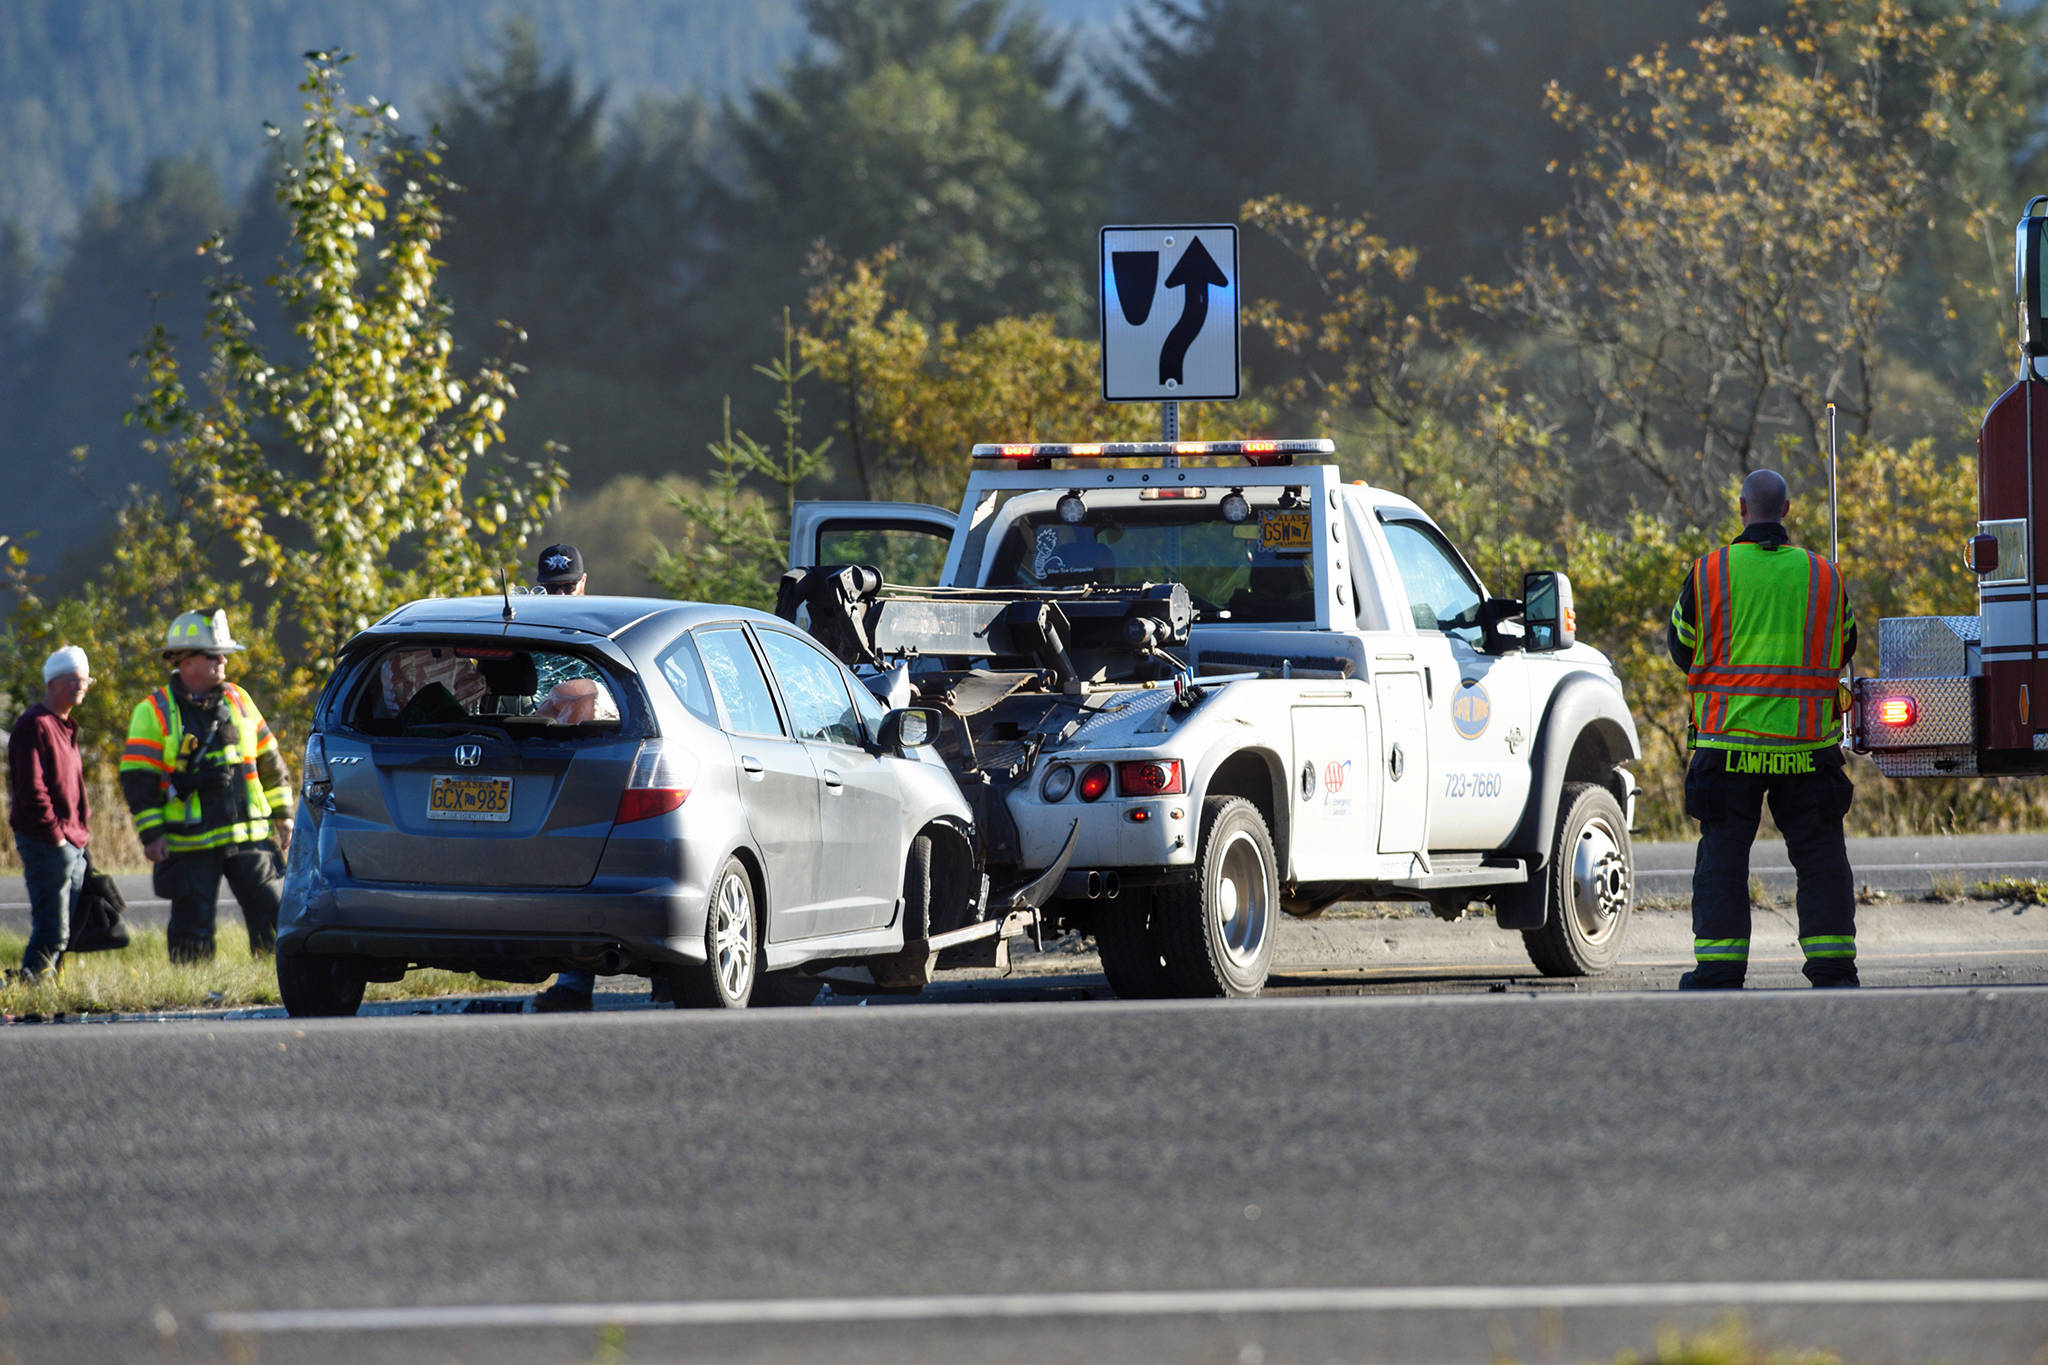 A damaged vehicle is pulled away by a tow truck after an afternoon car crash at the Fred Meyer intersection on Friday. (Michael Penn | Juneau Empire)